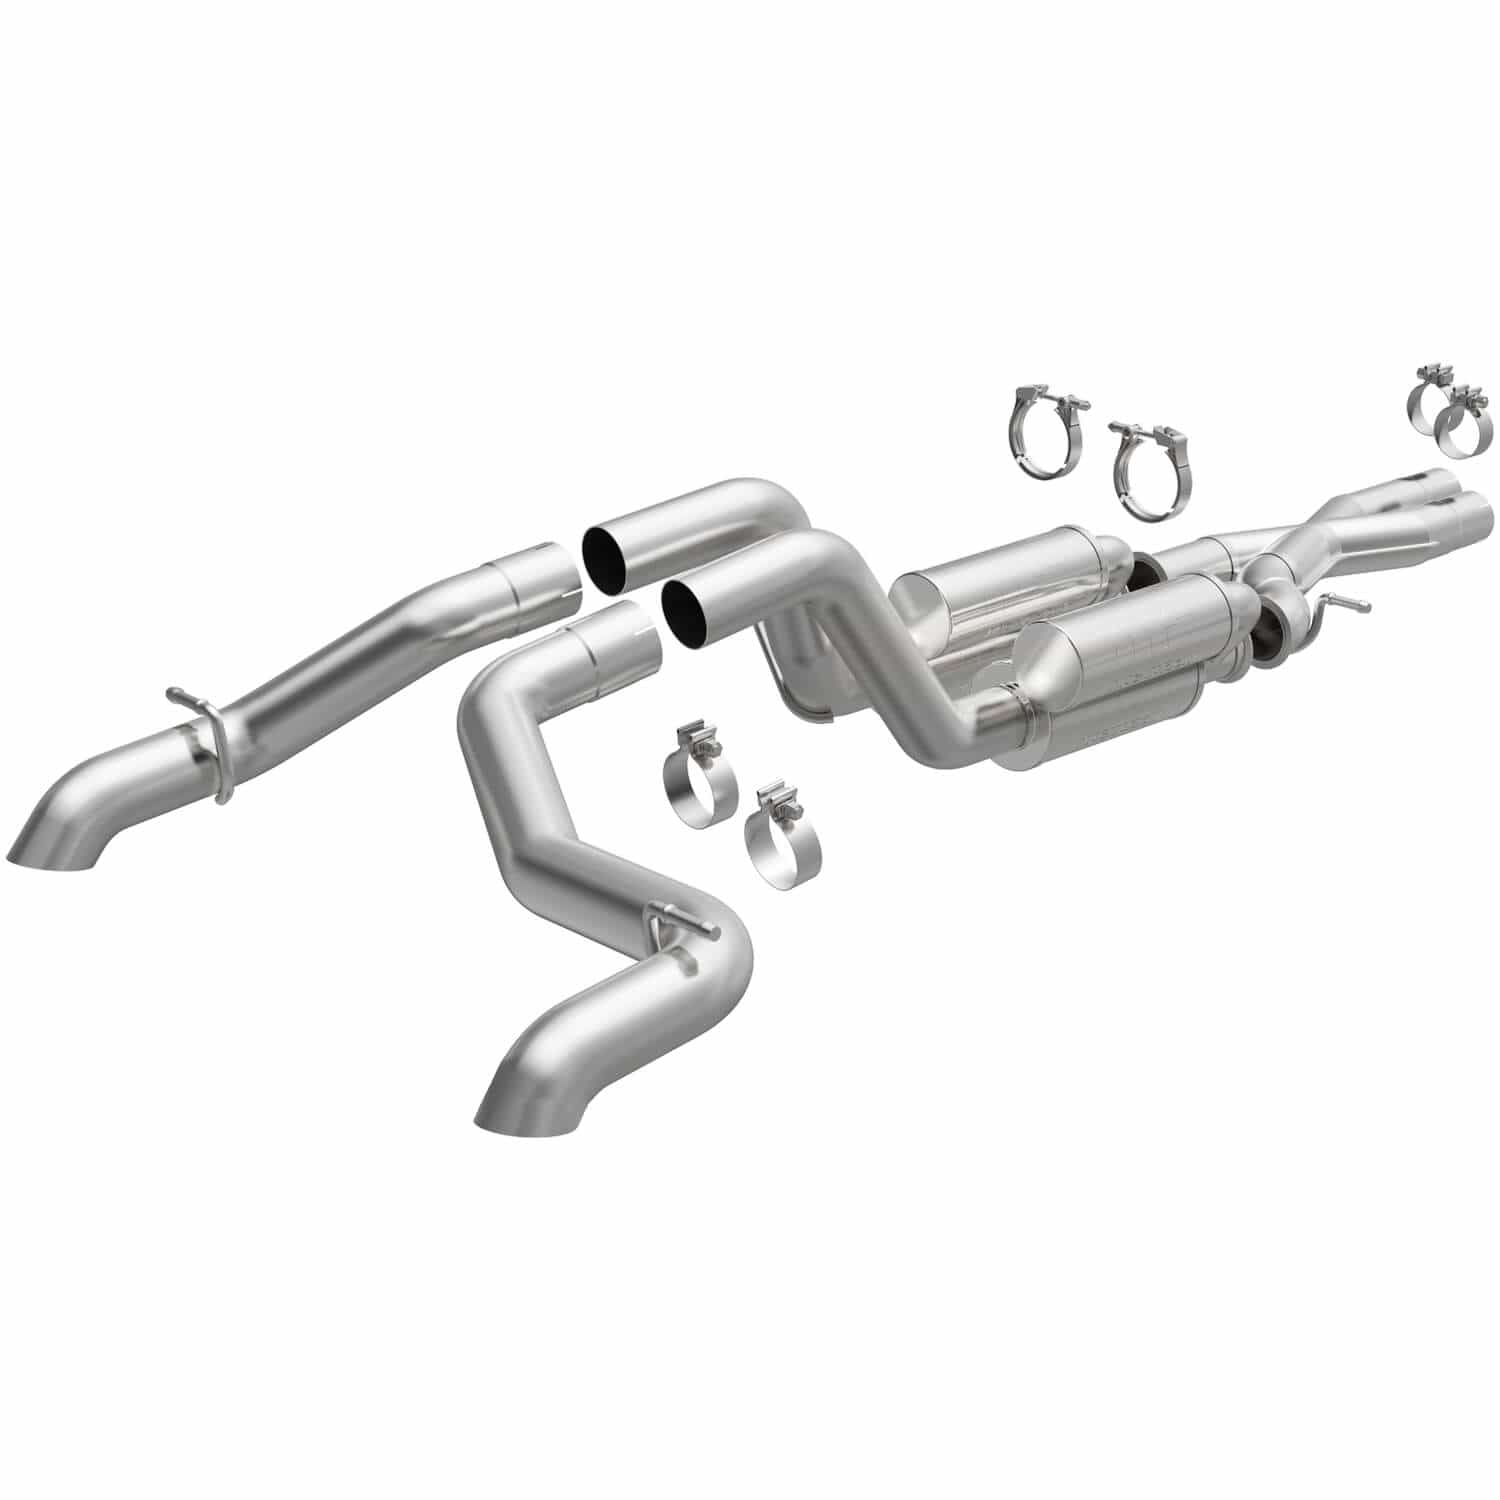 '21-23 Jeep Rubicon 392 Rock Crawler Series Cat-Back Exhaust System MagnaFlow parts